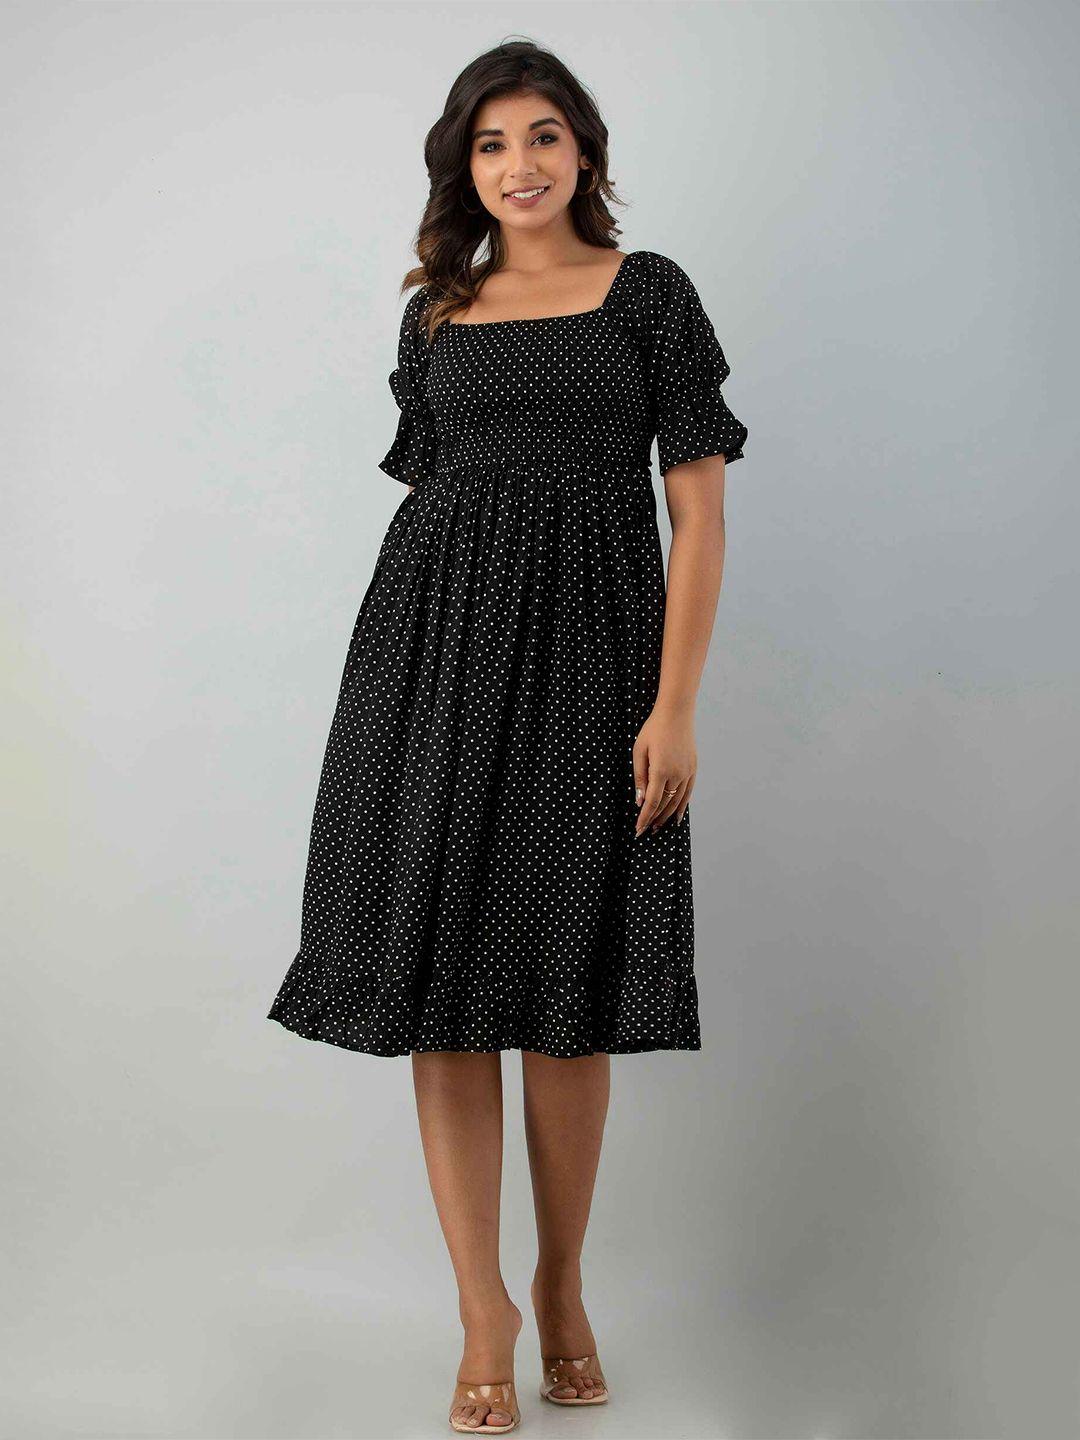 indianic polka dot printed smocked puff sleeves square neck fit & flare dress